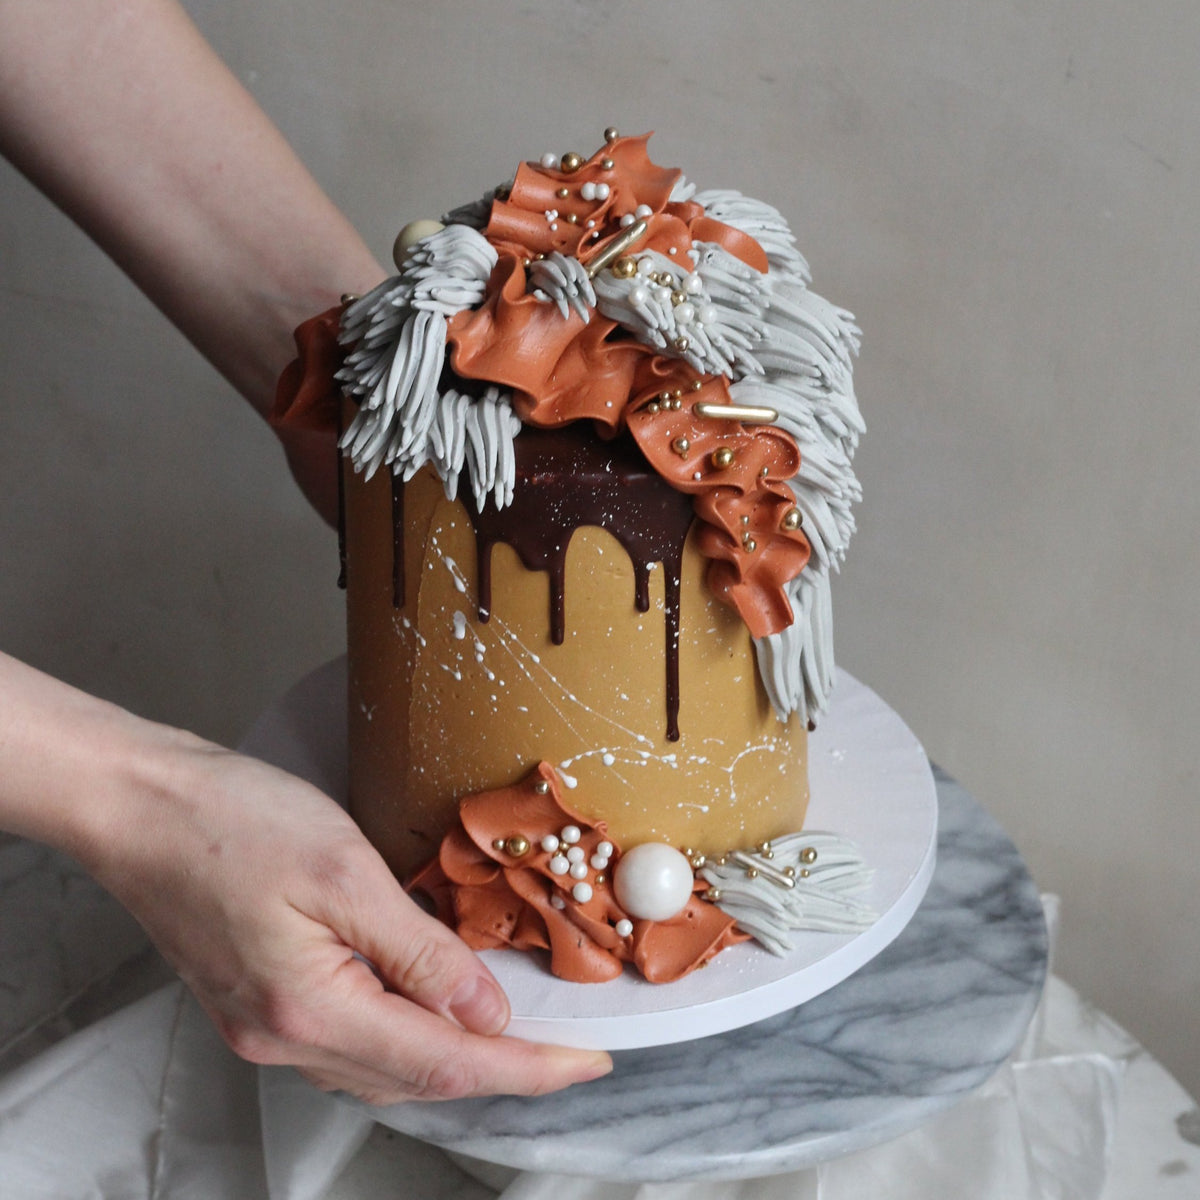 Our signature Shag Cake in warm tones, covered in shaggy buttercream!